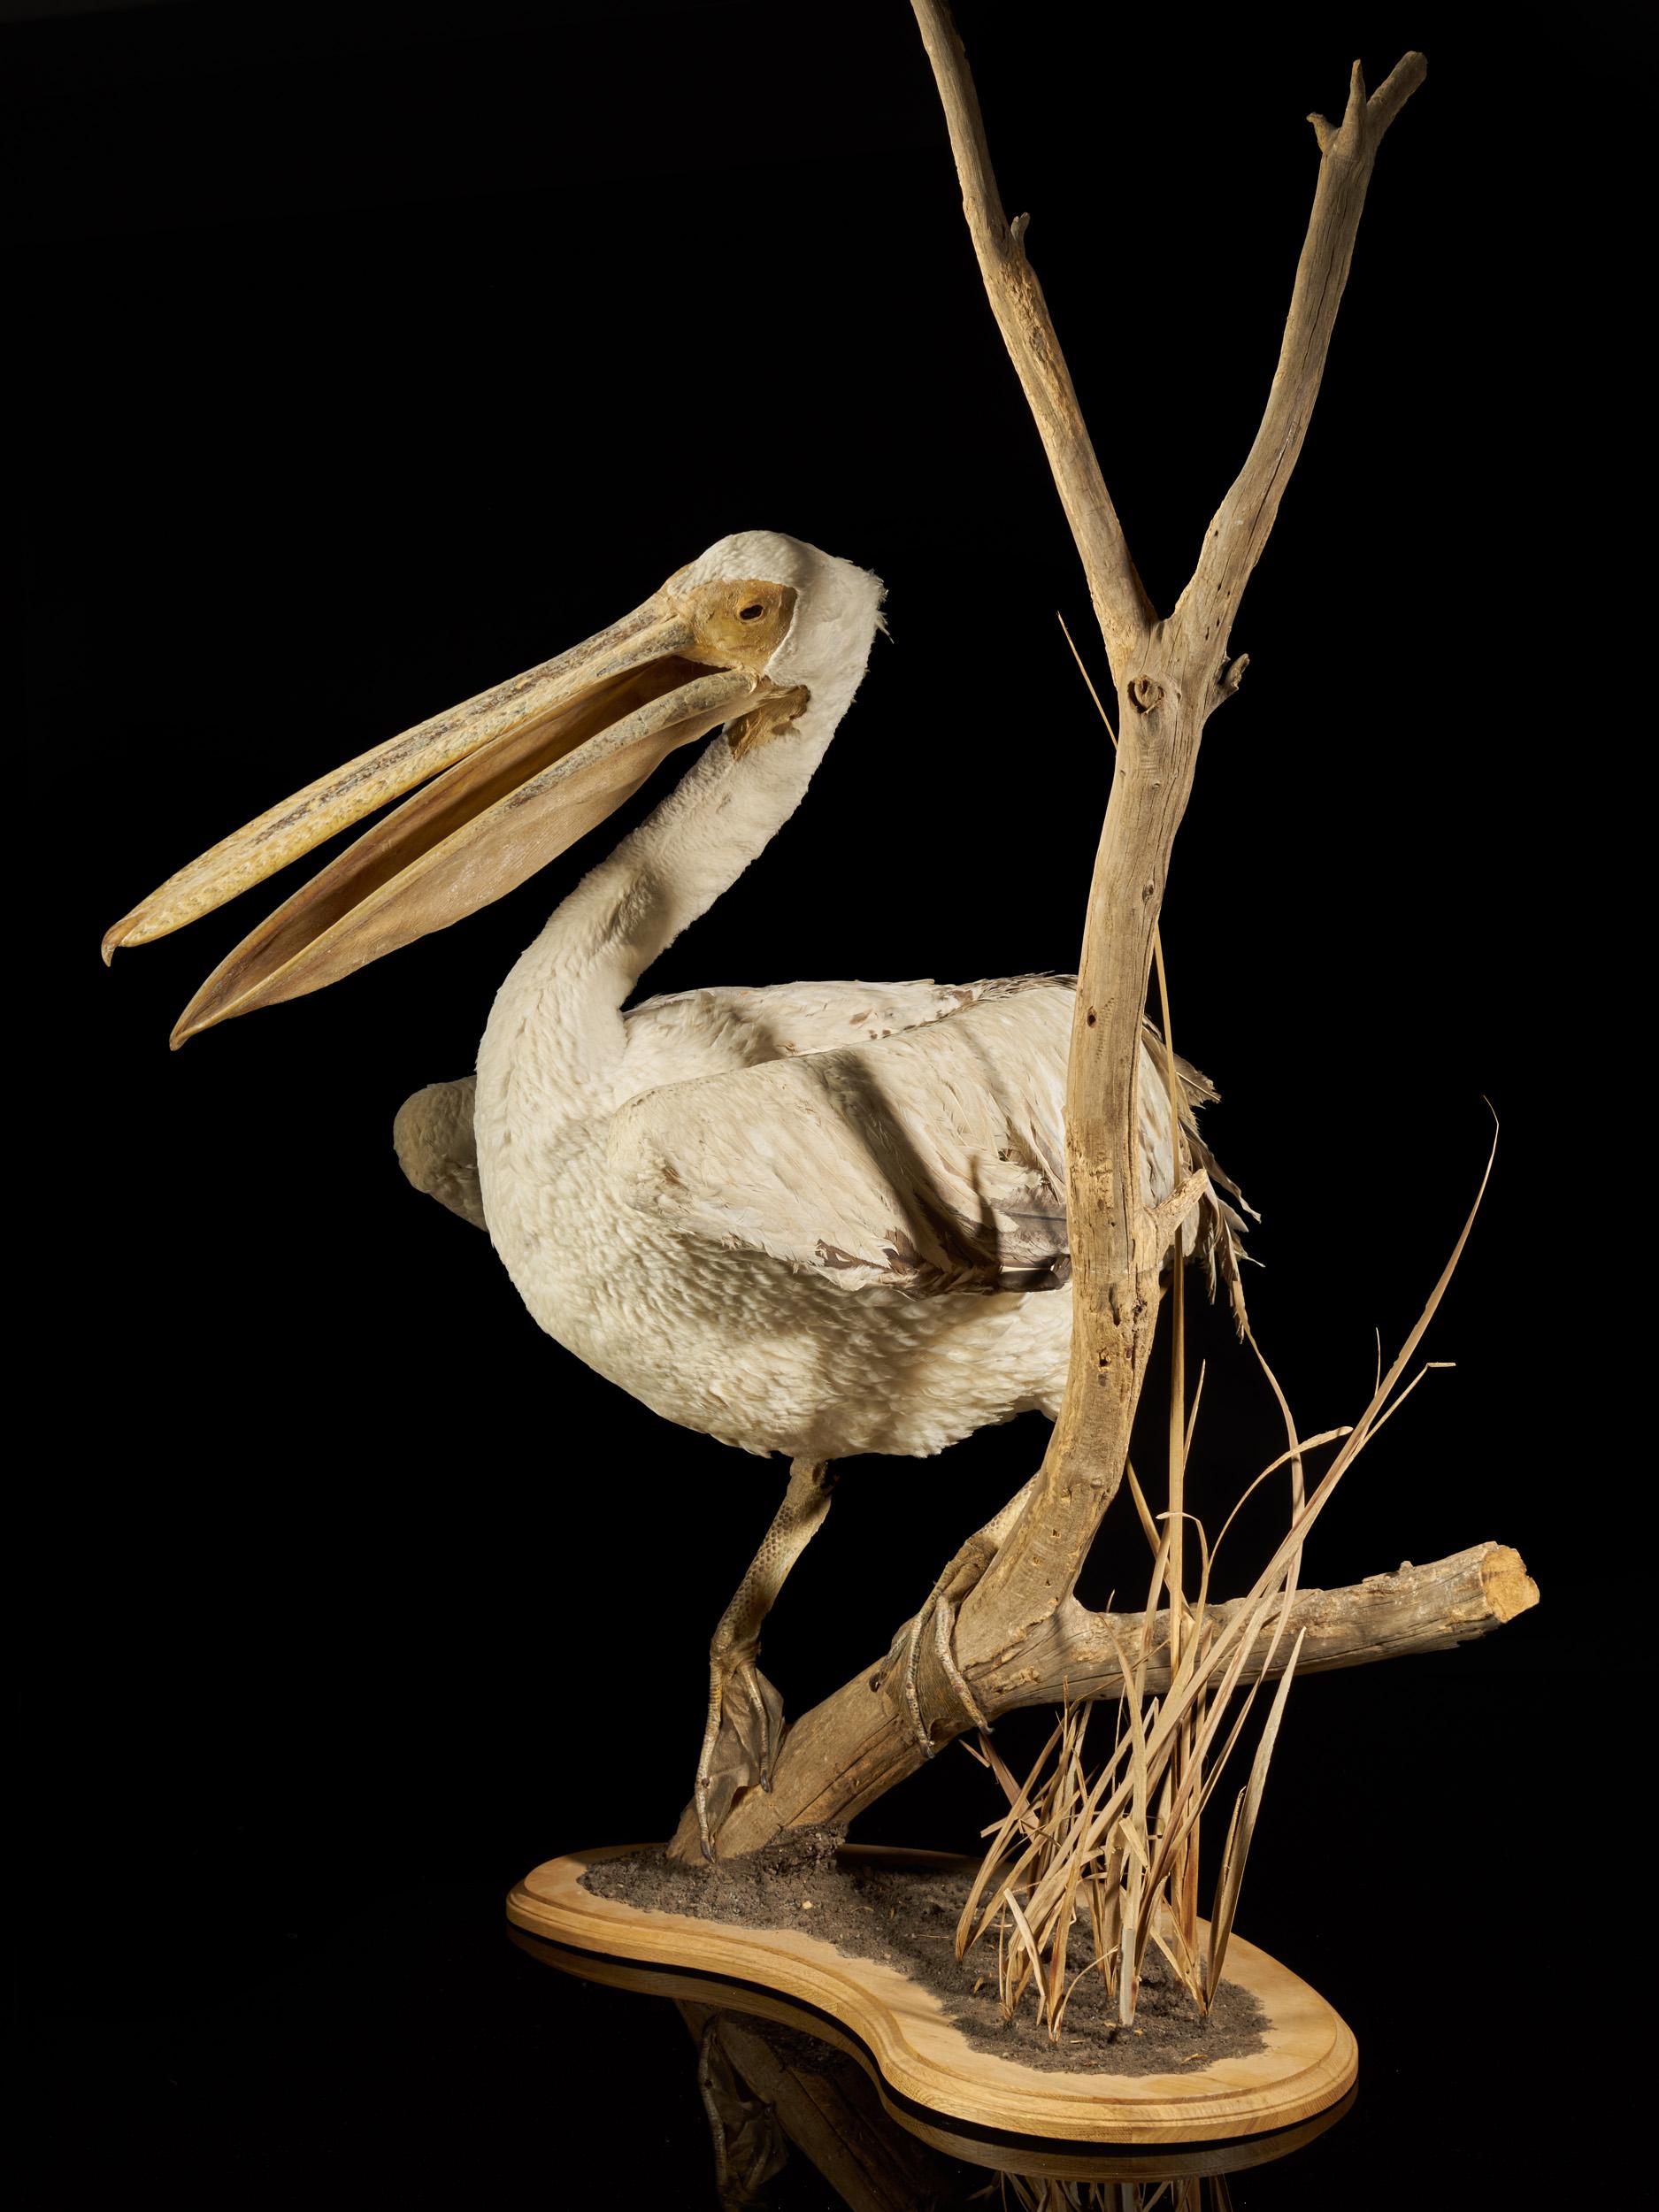 Pelicans are large water birds characterized by a long beak and a large throat pouch used for catching prey and draining water from the scooped-up contents before swallowing. They have predominantly pale plumage and their bills, pouches, and bare